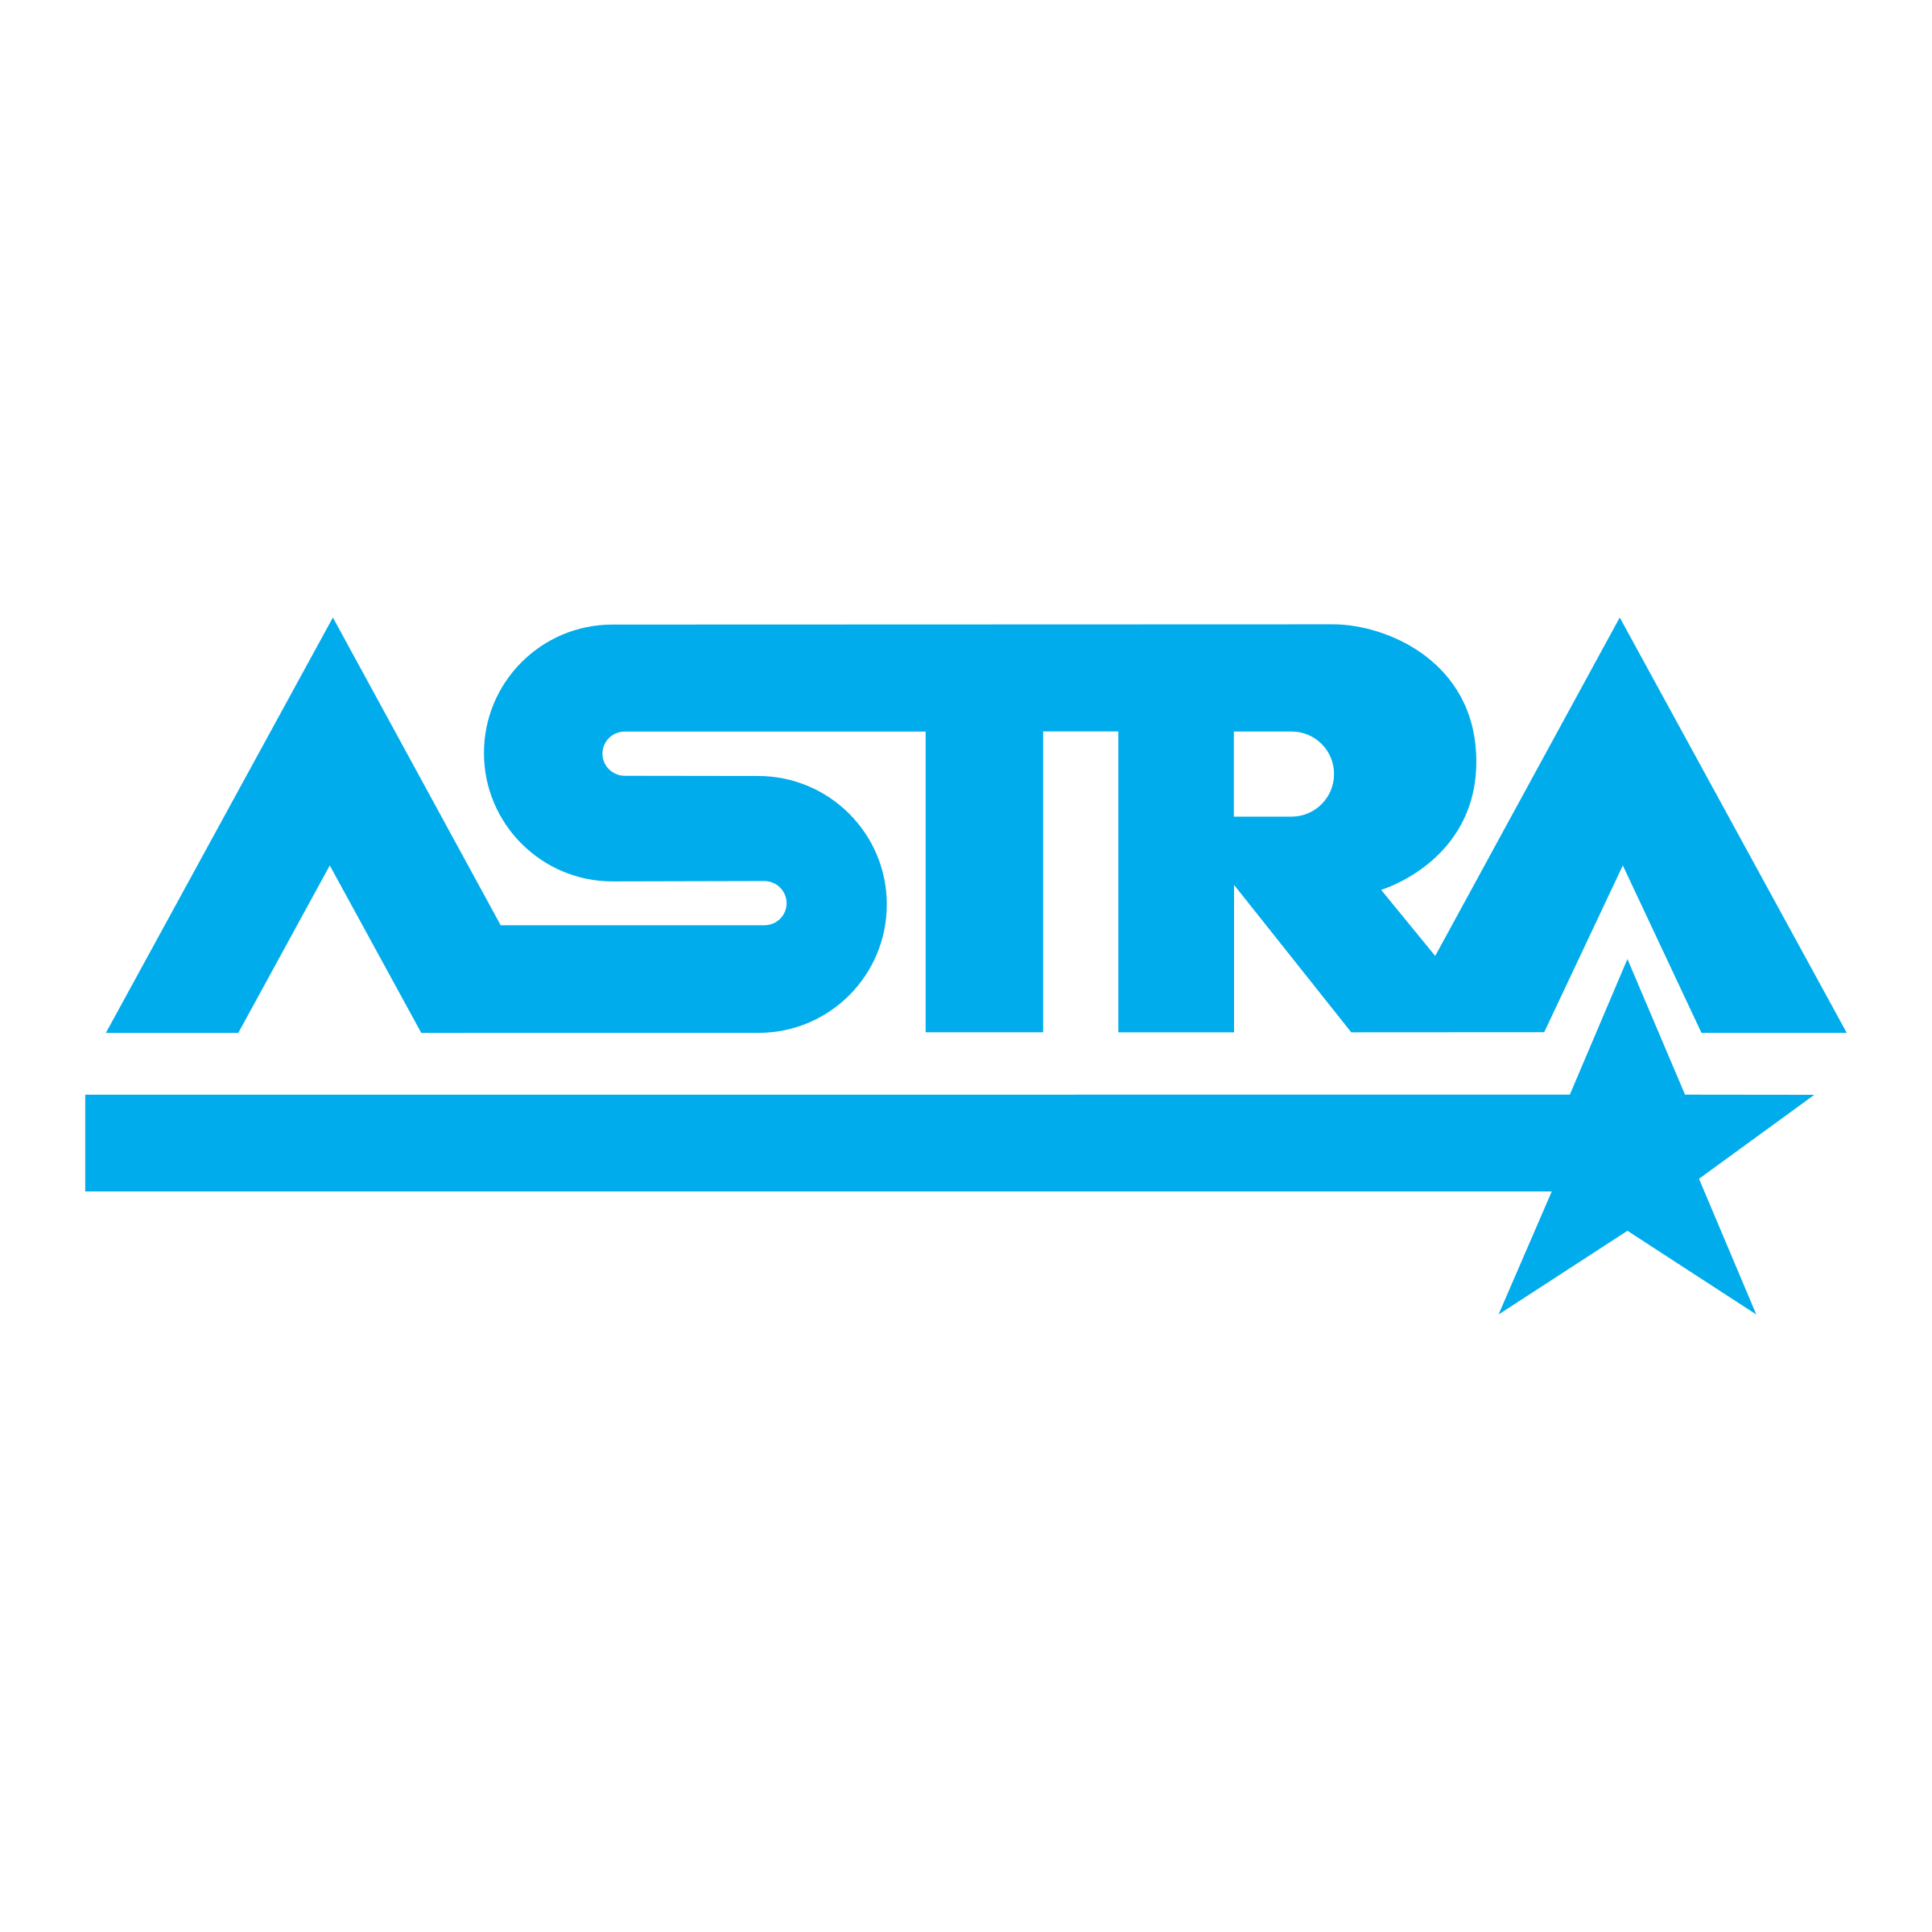 Astra Hosting - Cheap Web Hosting And Domain Name Registration Services